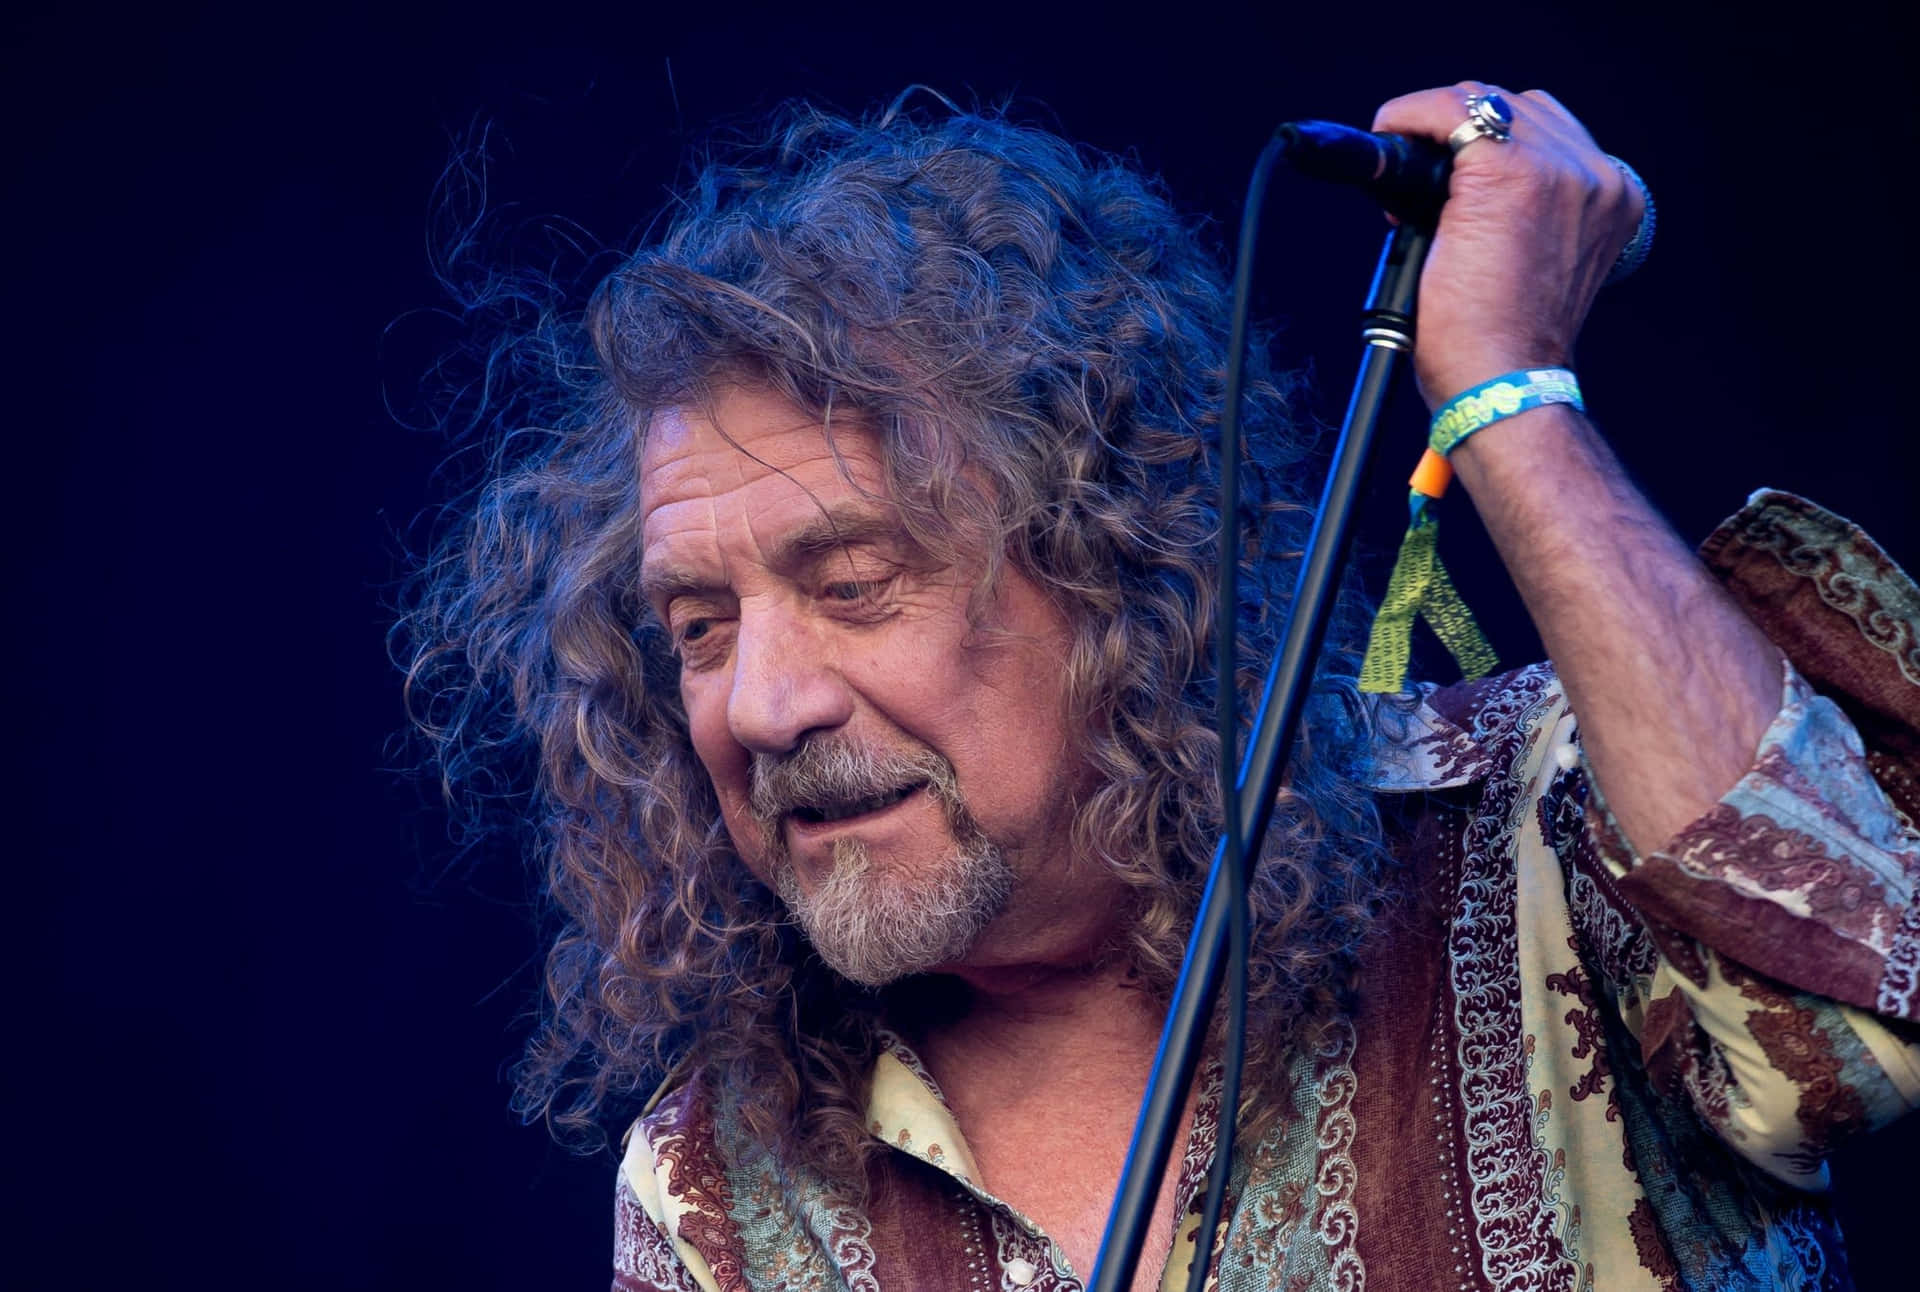 A Man With Curly Hair Singing Into A Microphone